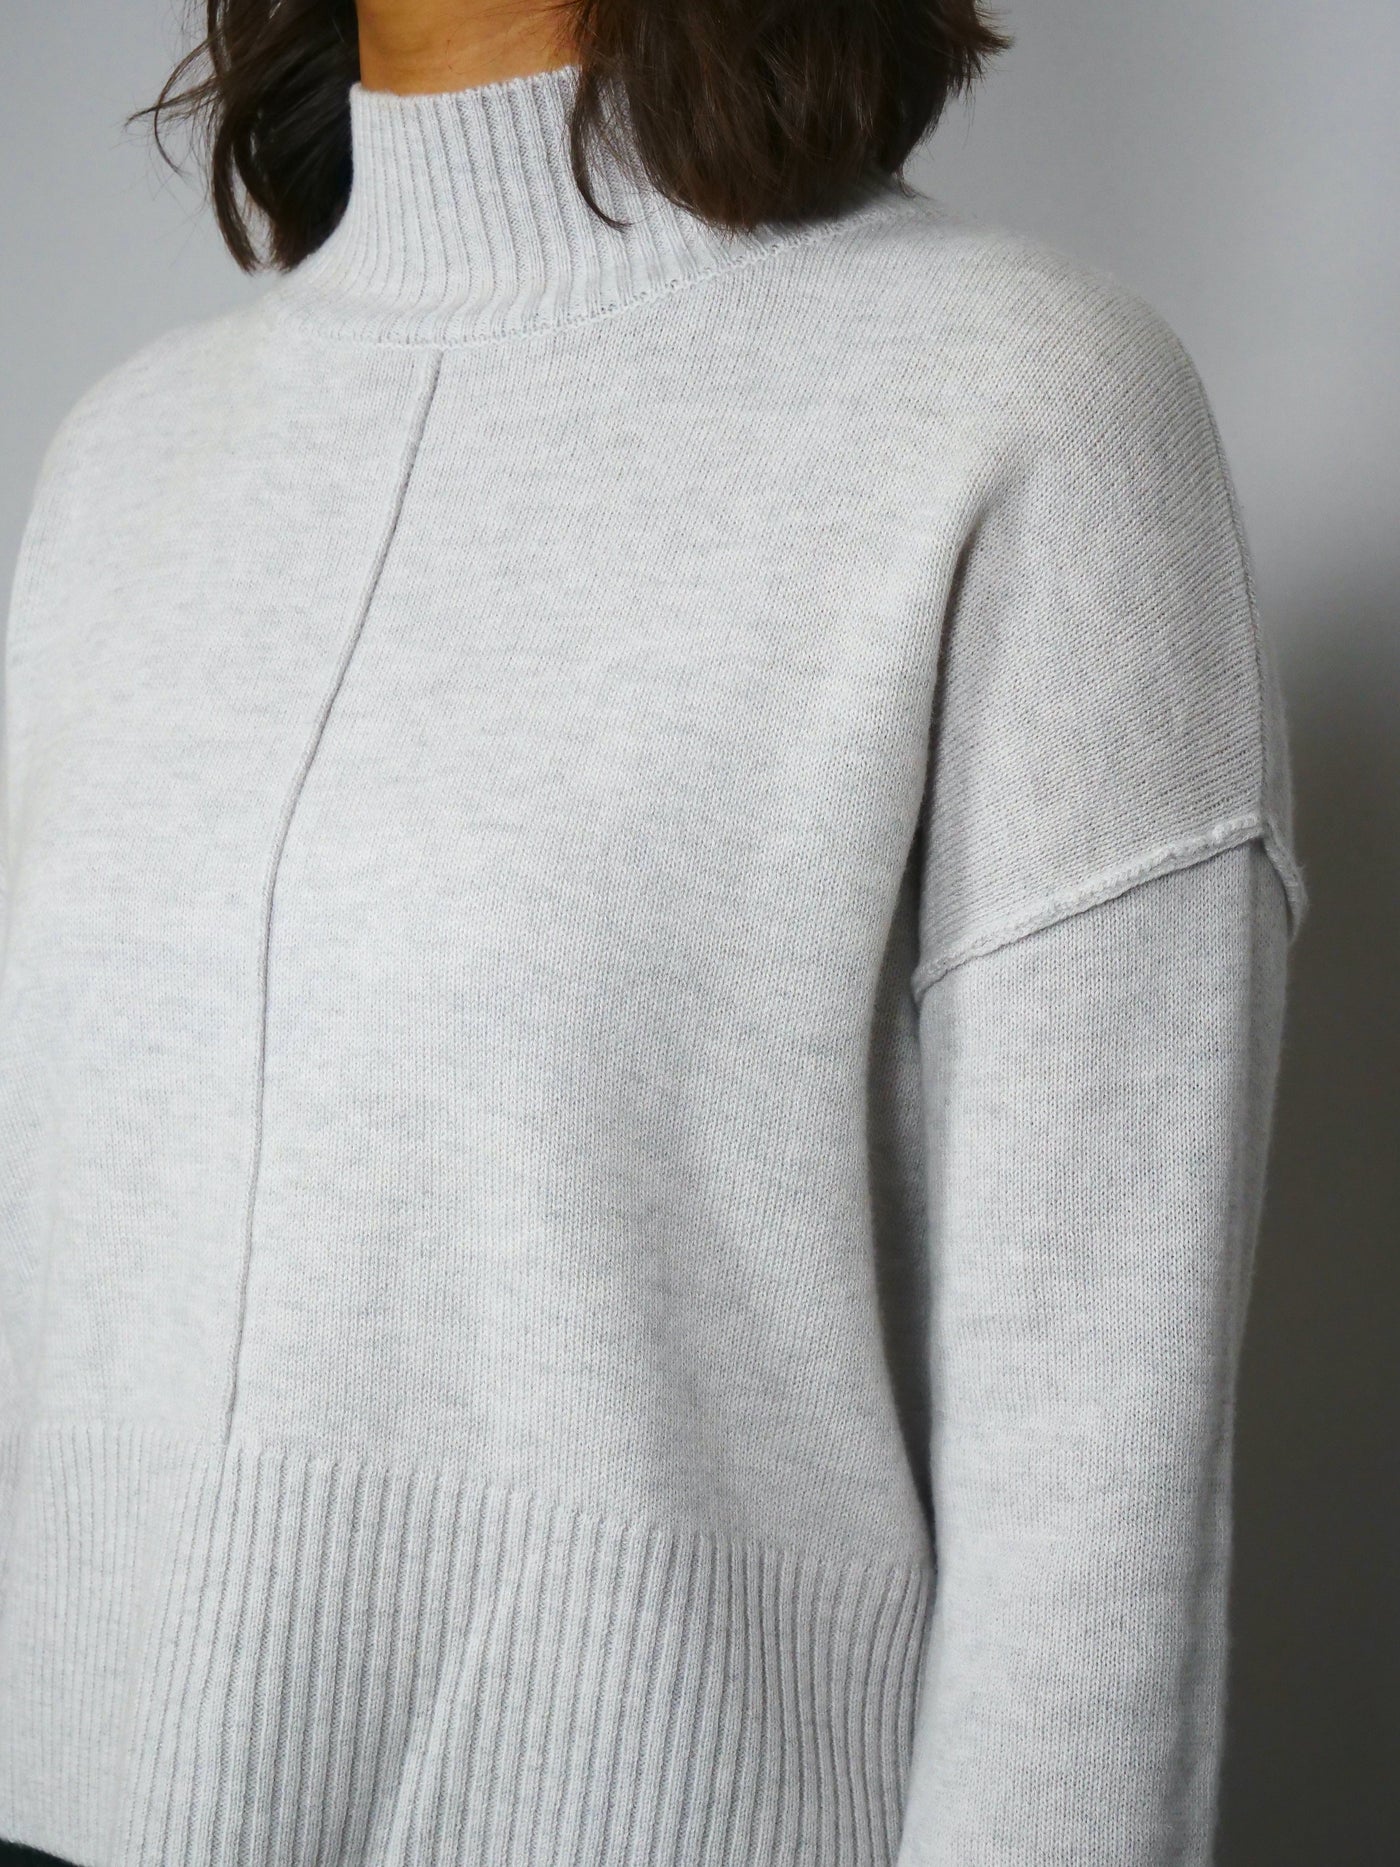 SY-23080 Sweater - 100% Wool - Accessories - Light Grey